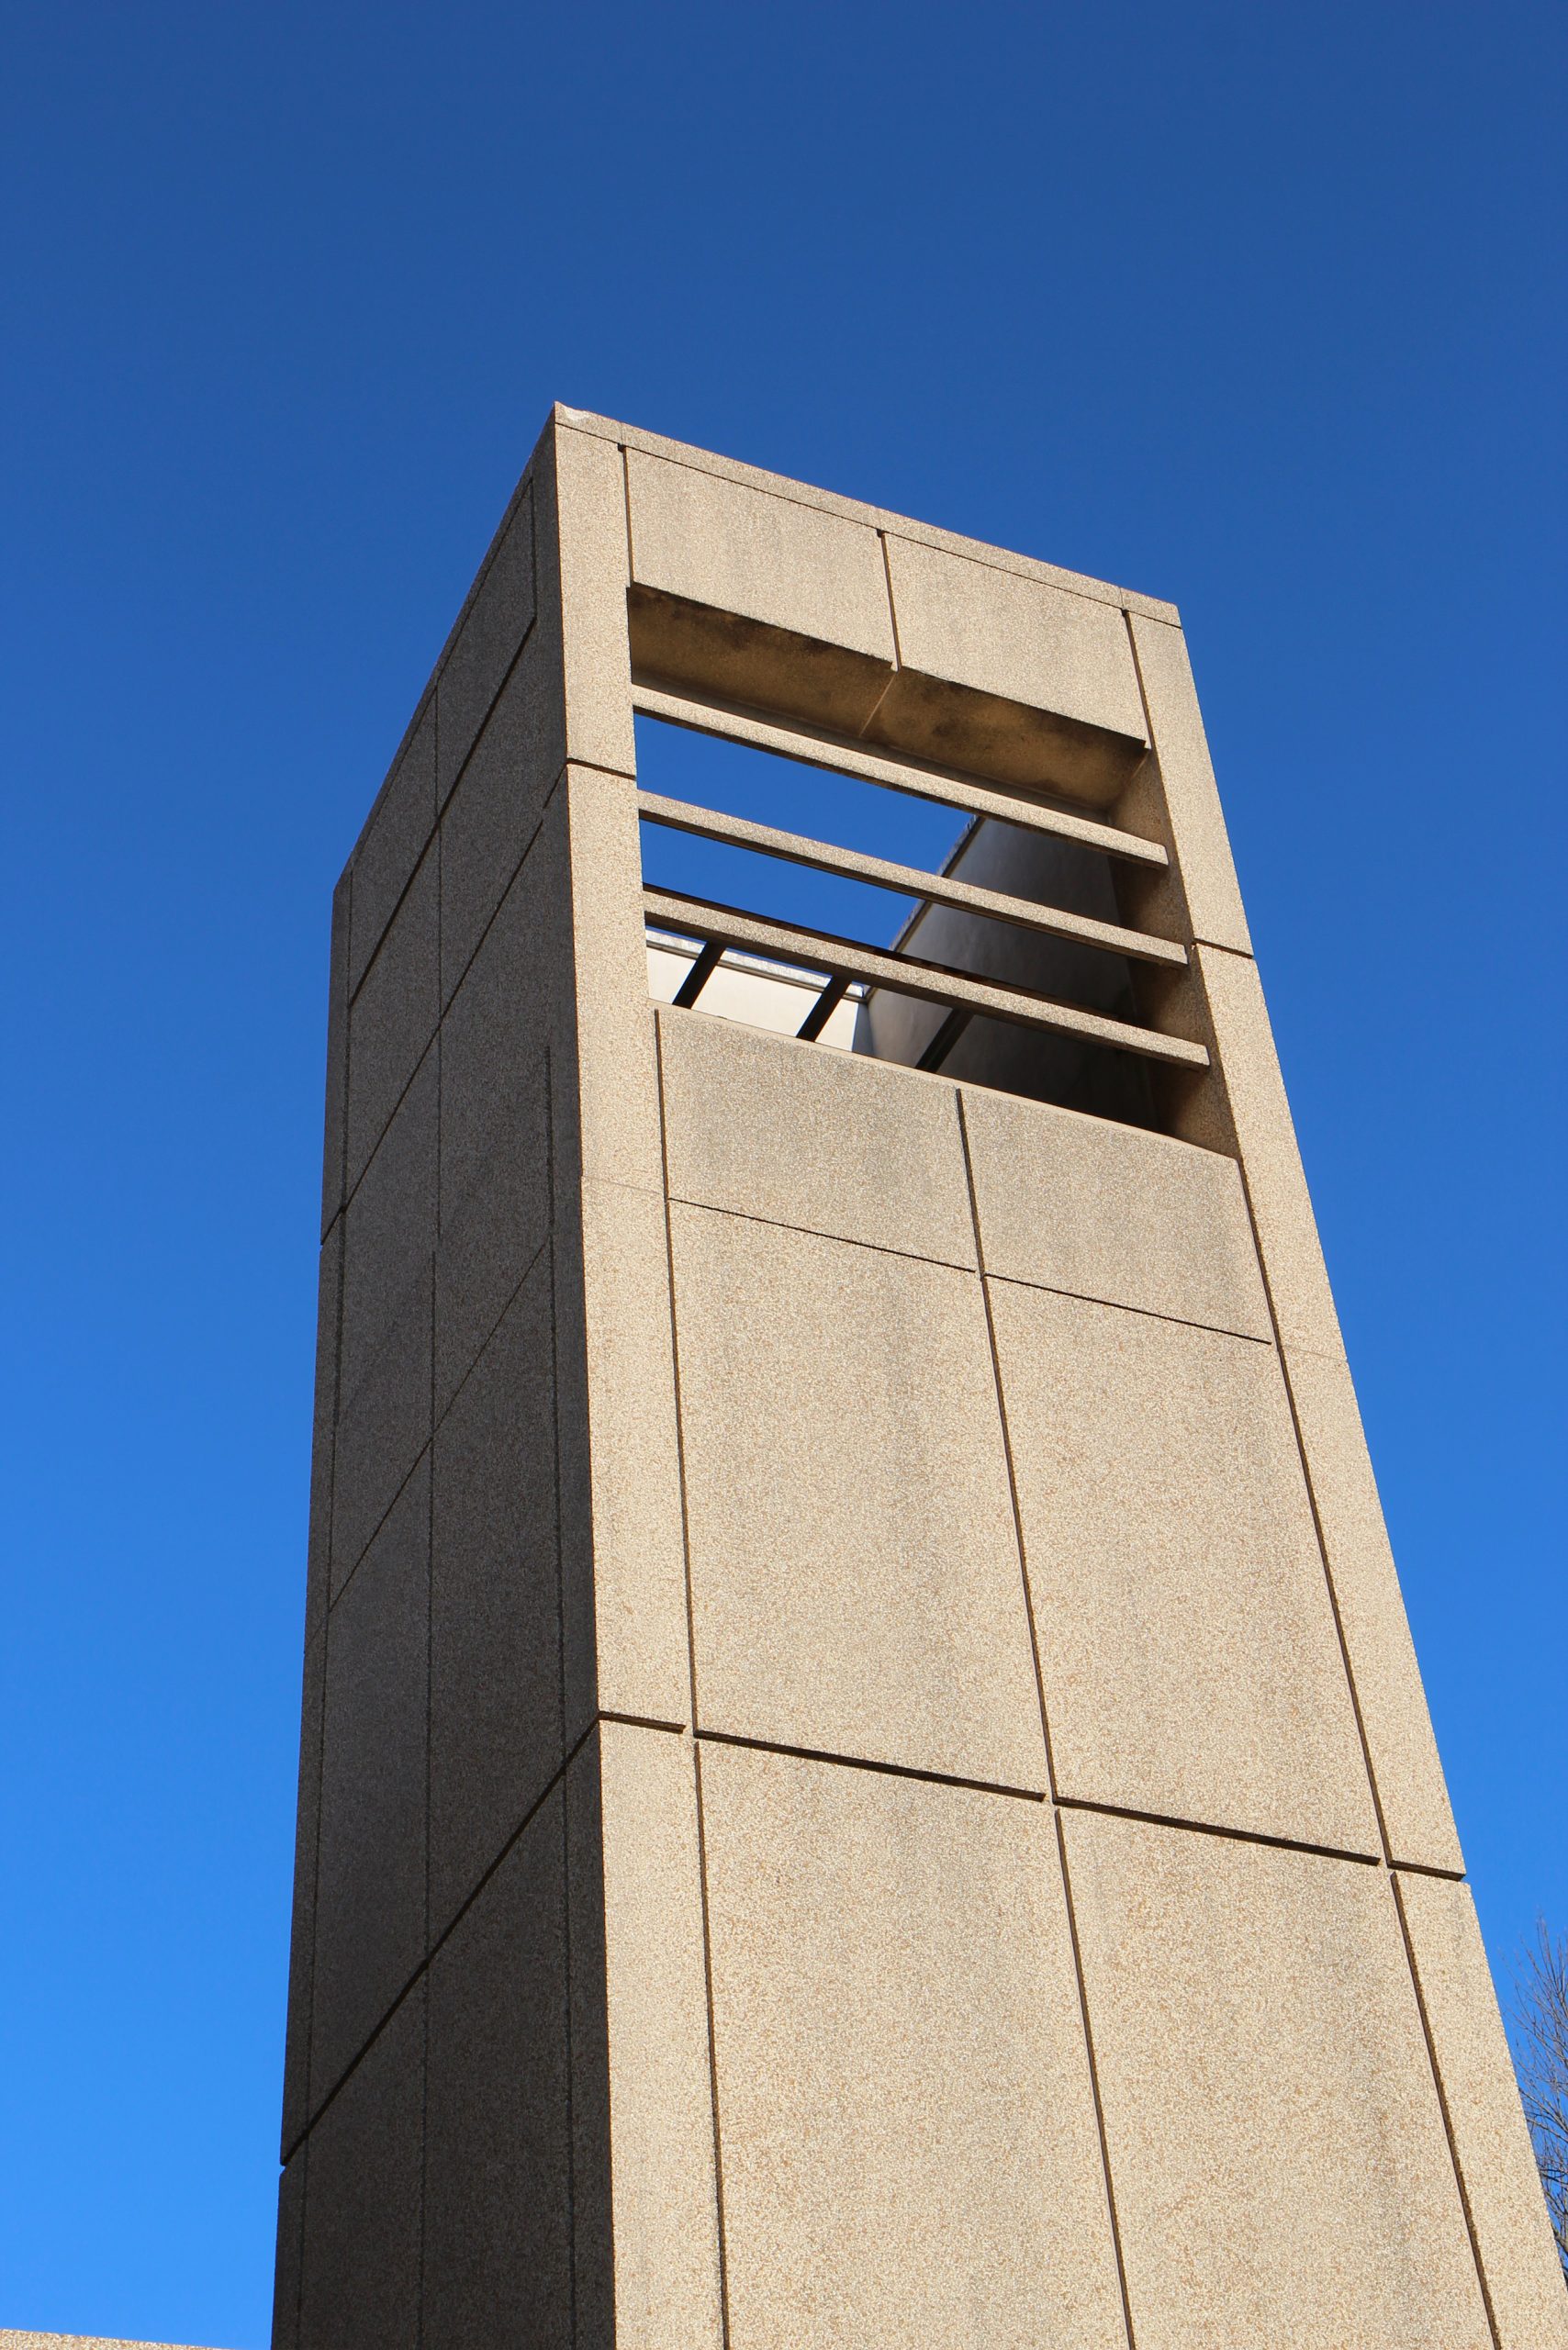 COE South Campus Tower